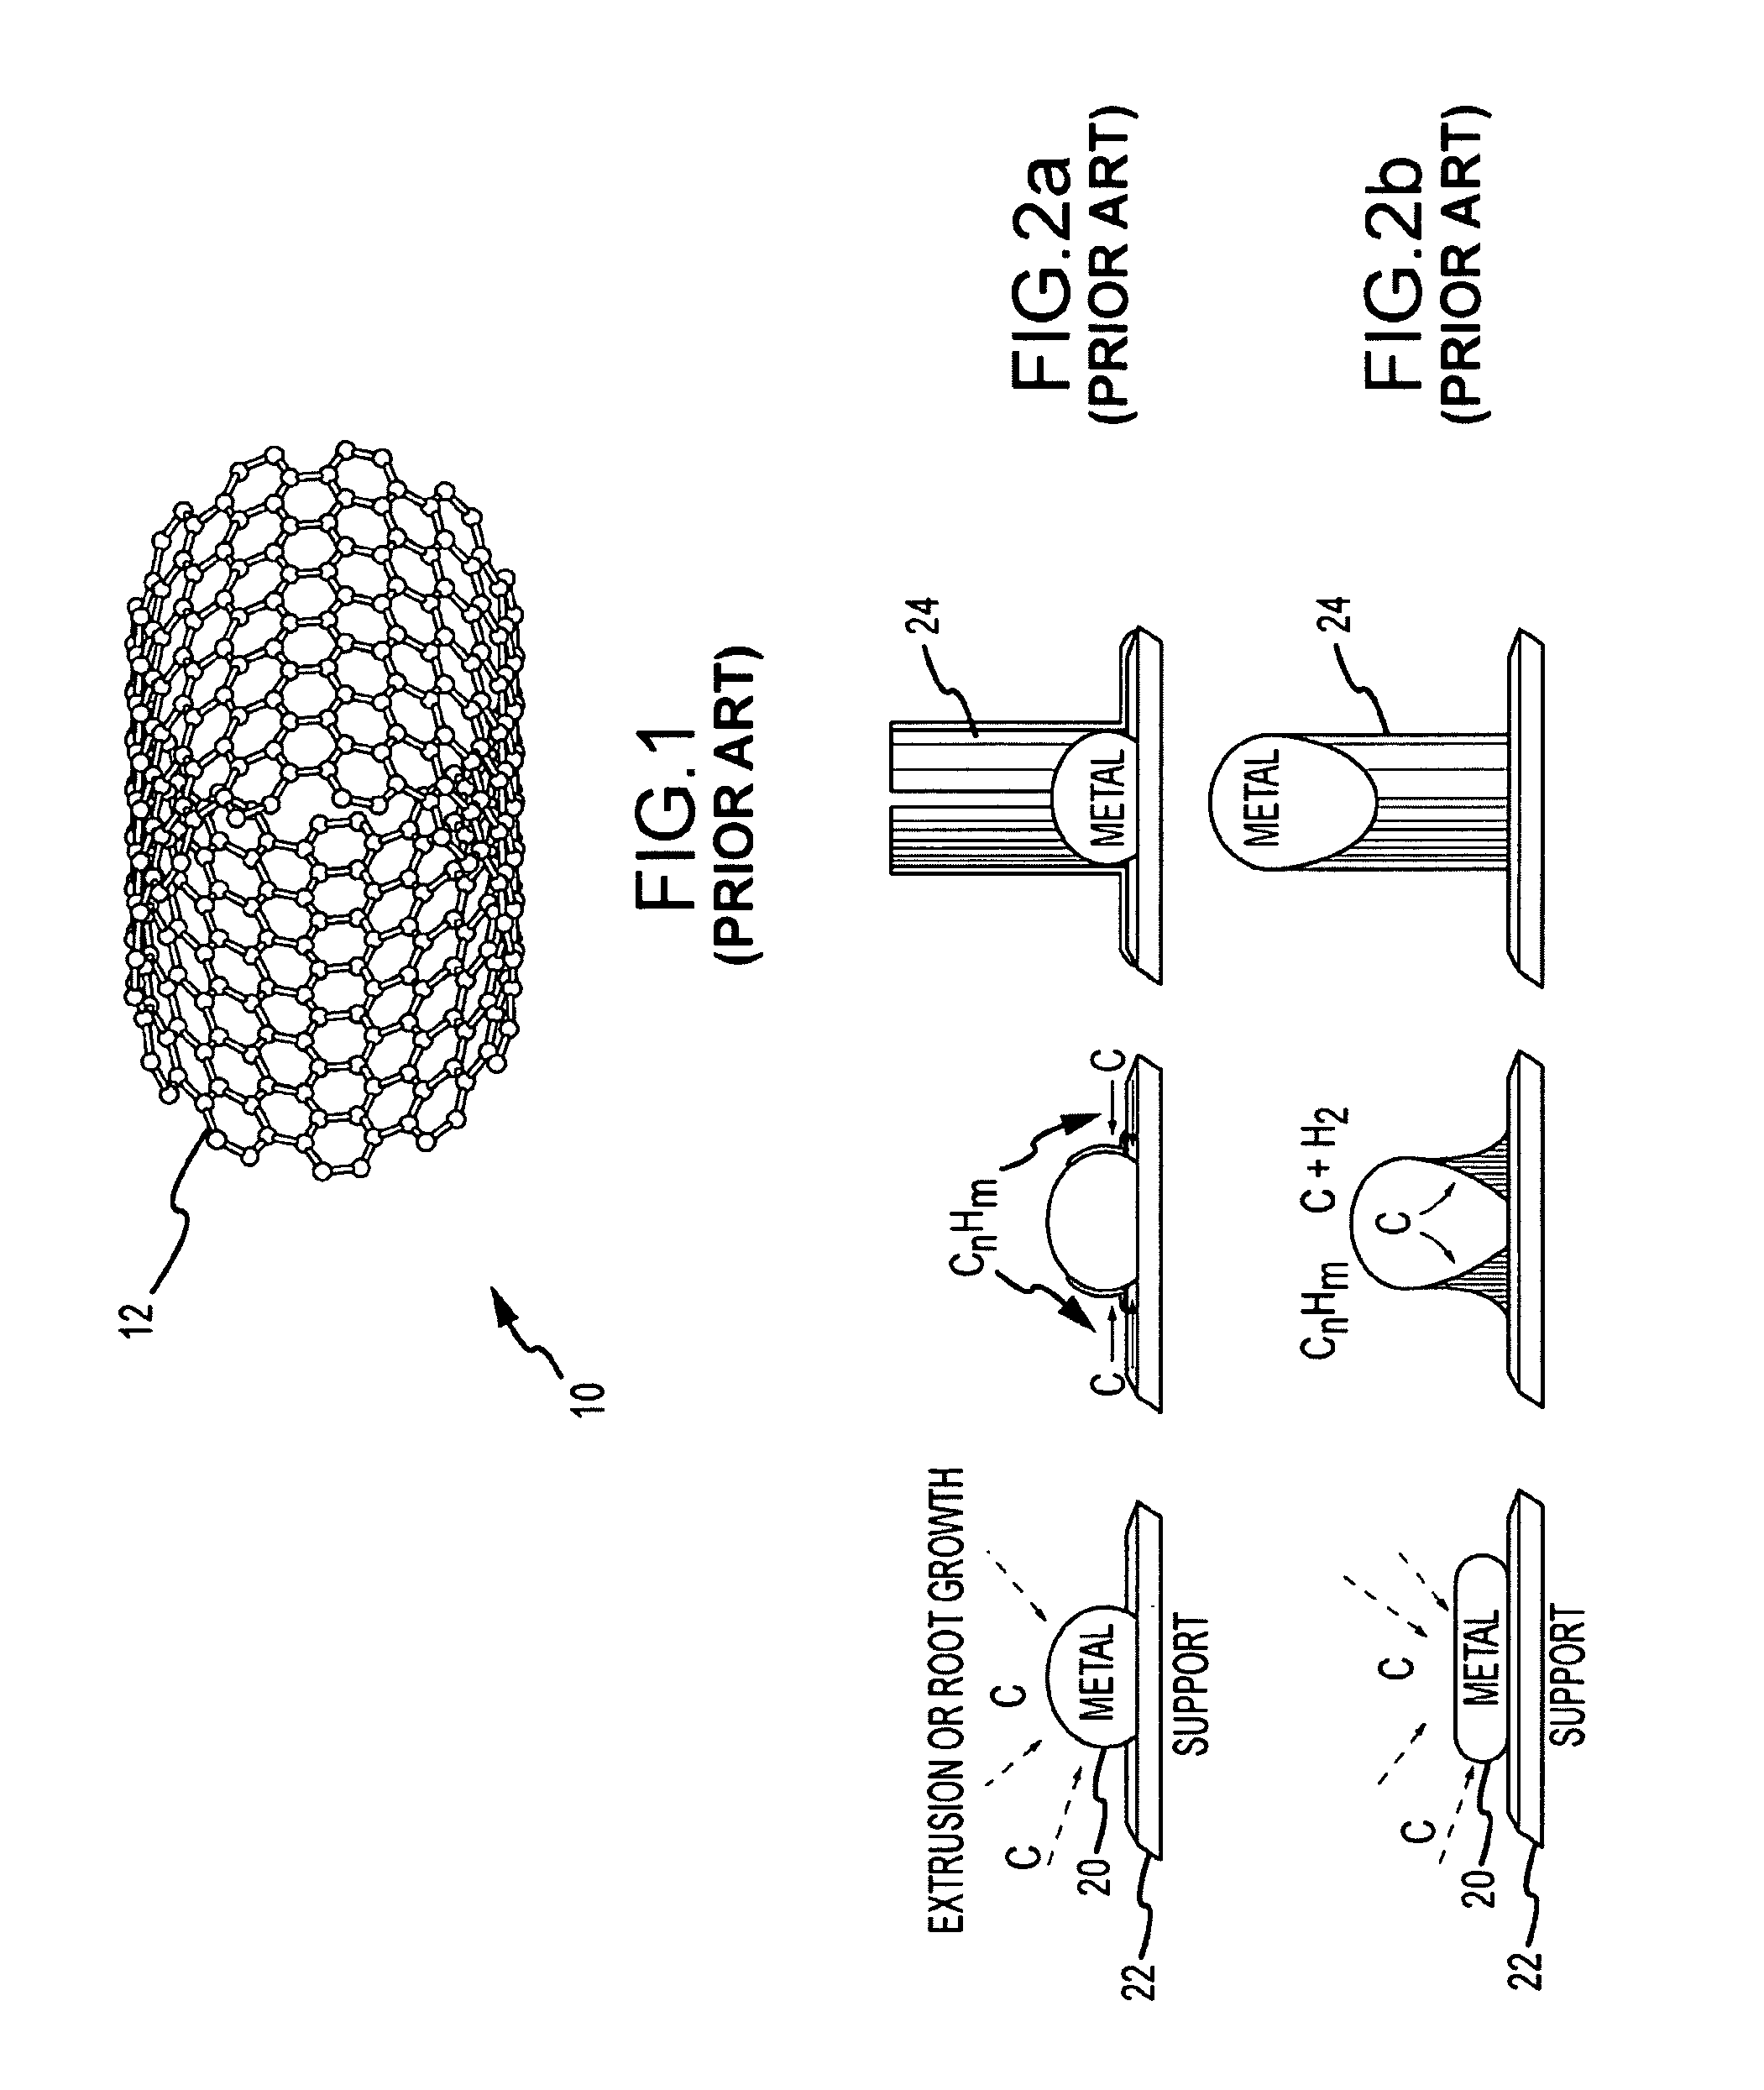 System and method for growing nanotubes with a specified isotope composition via ion implantation using a catalytic transmembrane